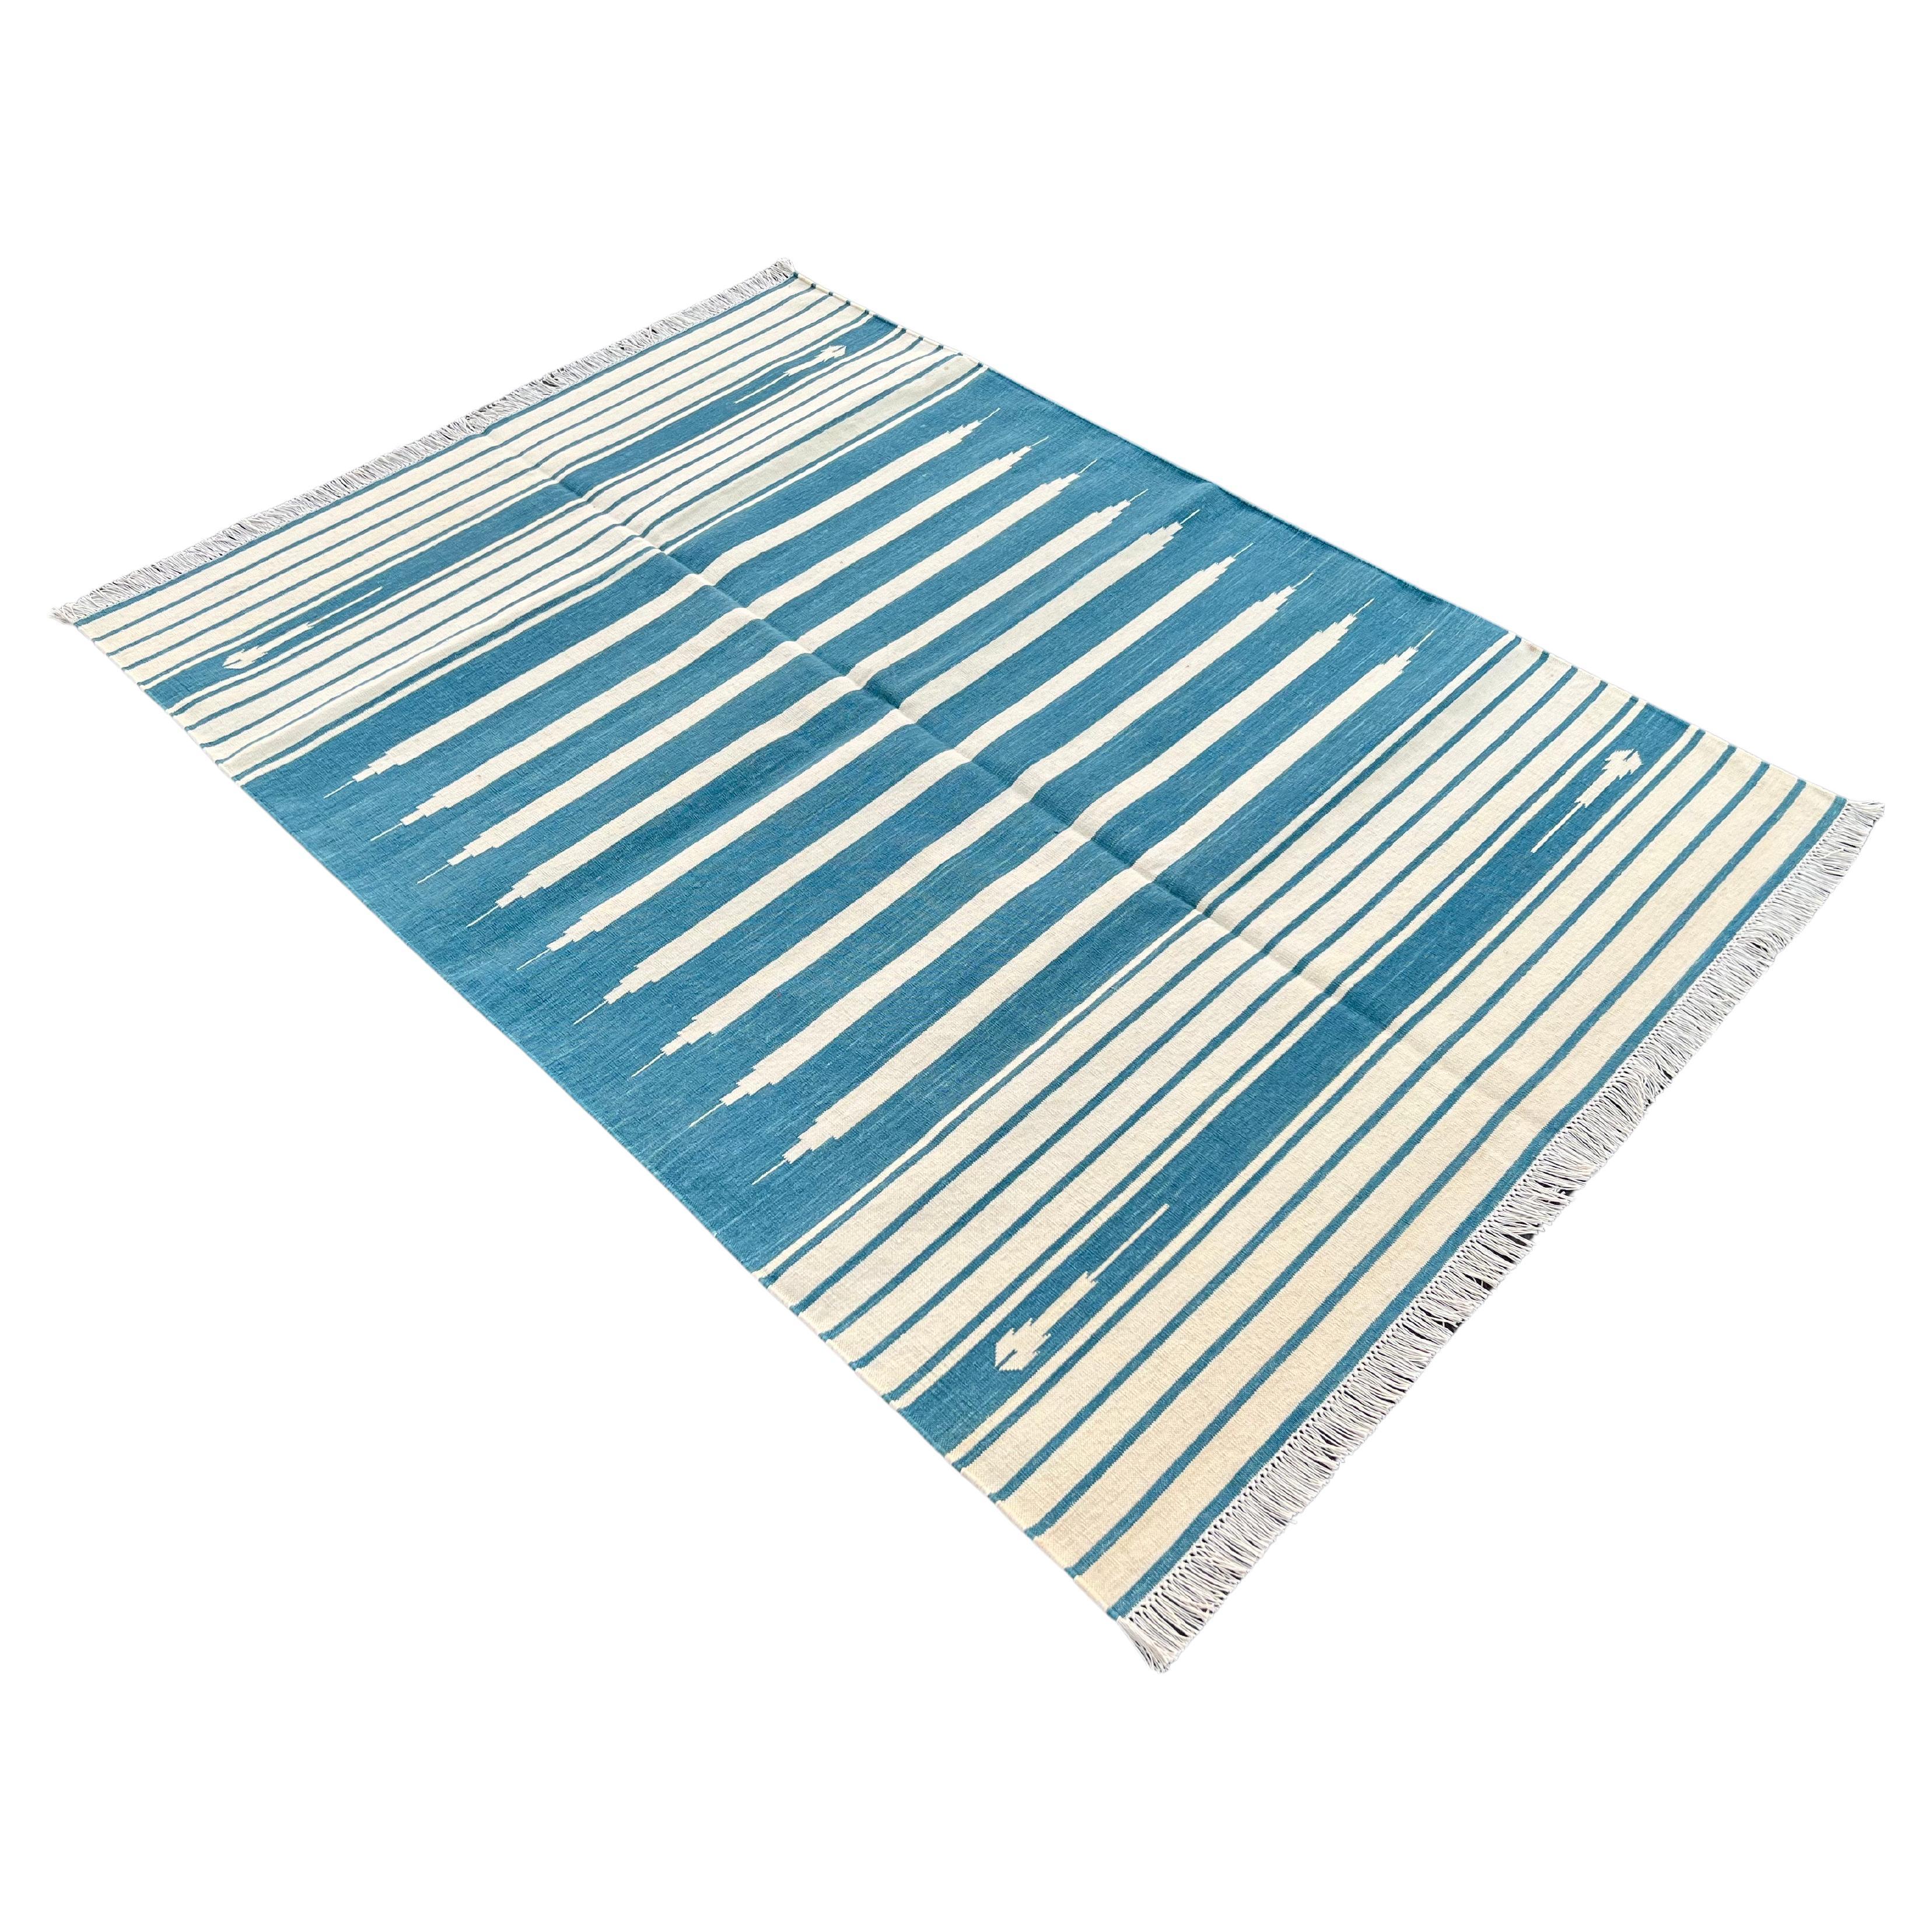 Handmade Cotton Area Flat Weave Rug, 4x6 Cream And Blue Striped Indian Dhurrie For Sale